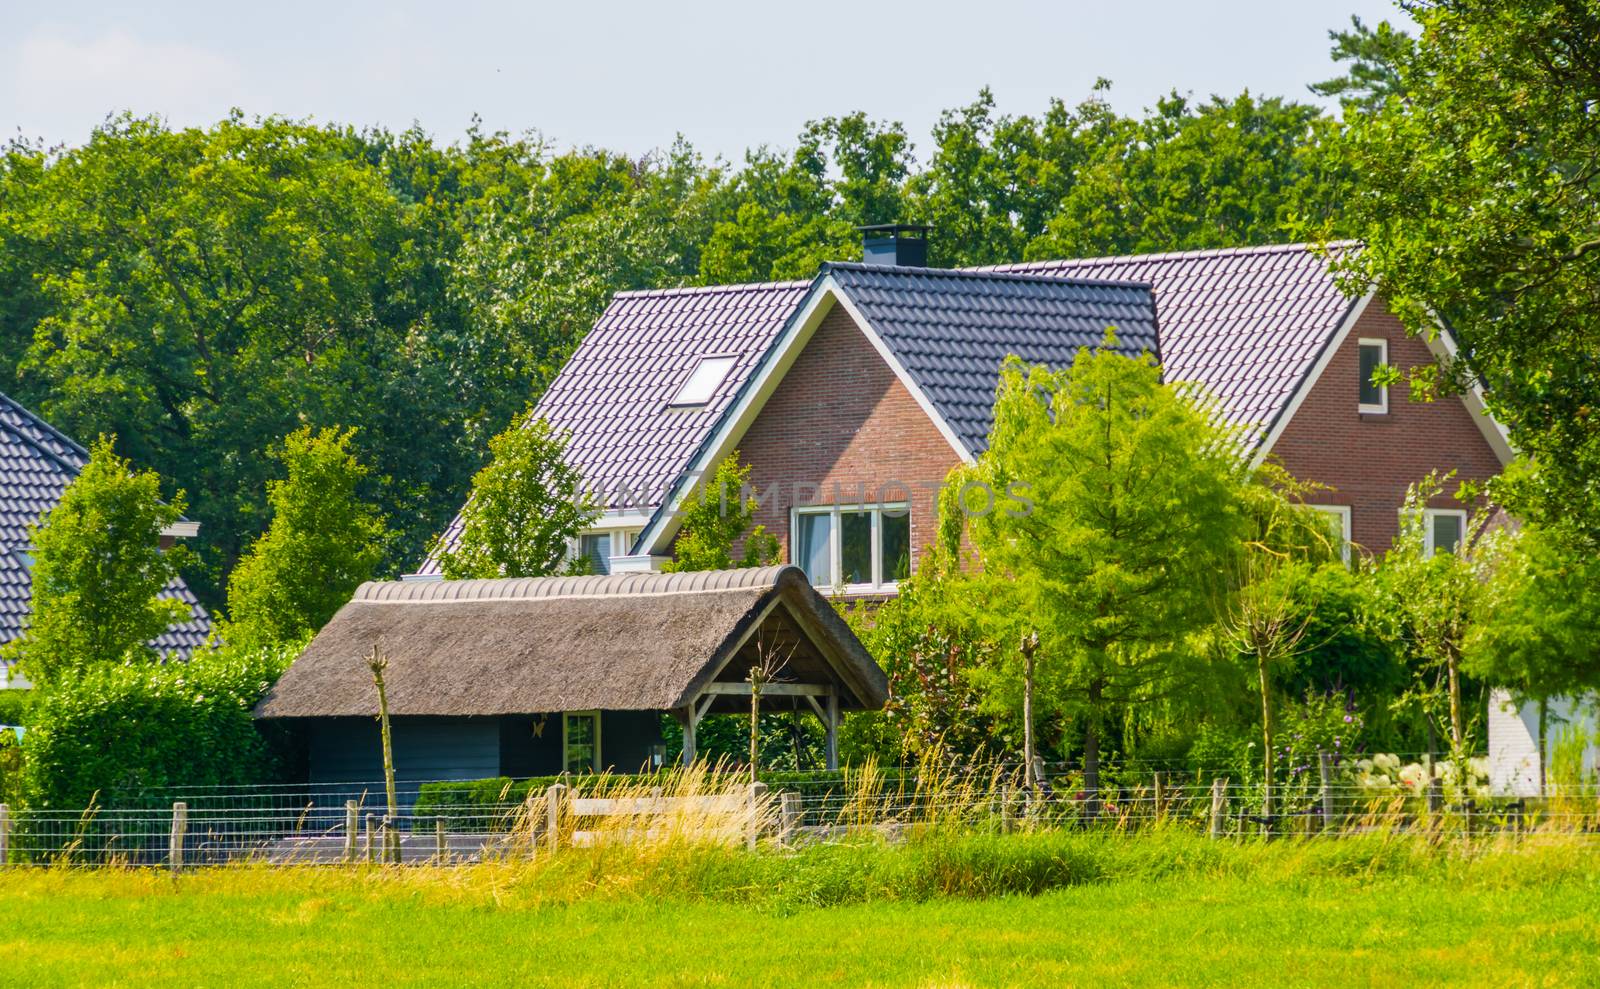 Modern farm house with a big grass pasture, Dutch architecture at the country side, Bergen op zoom, The Netherlands